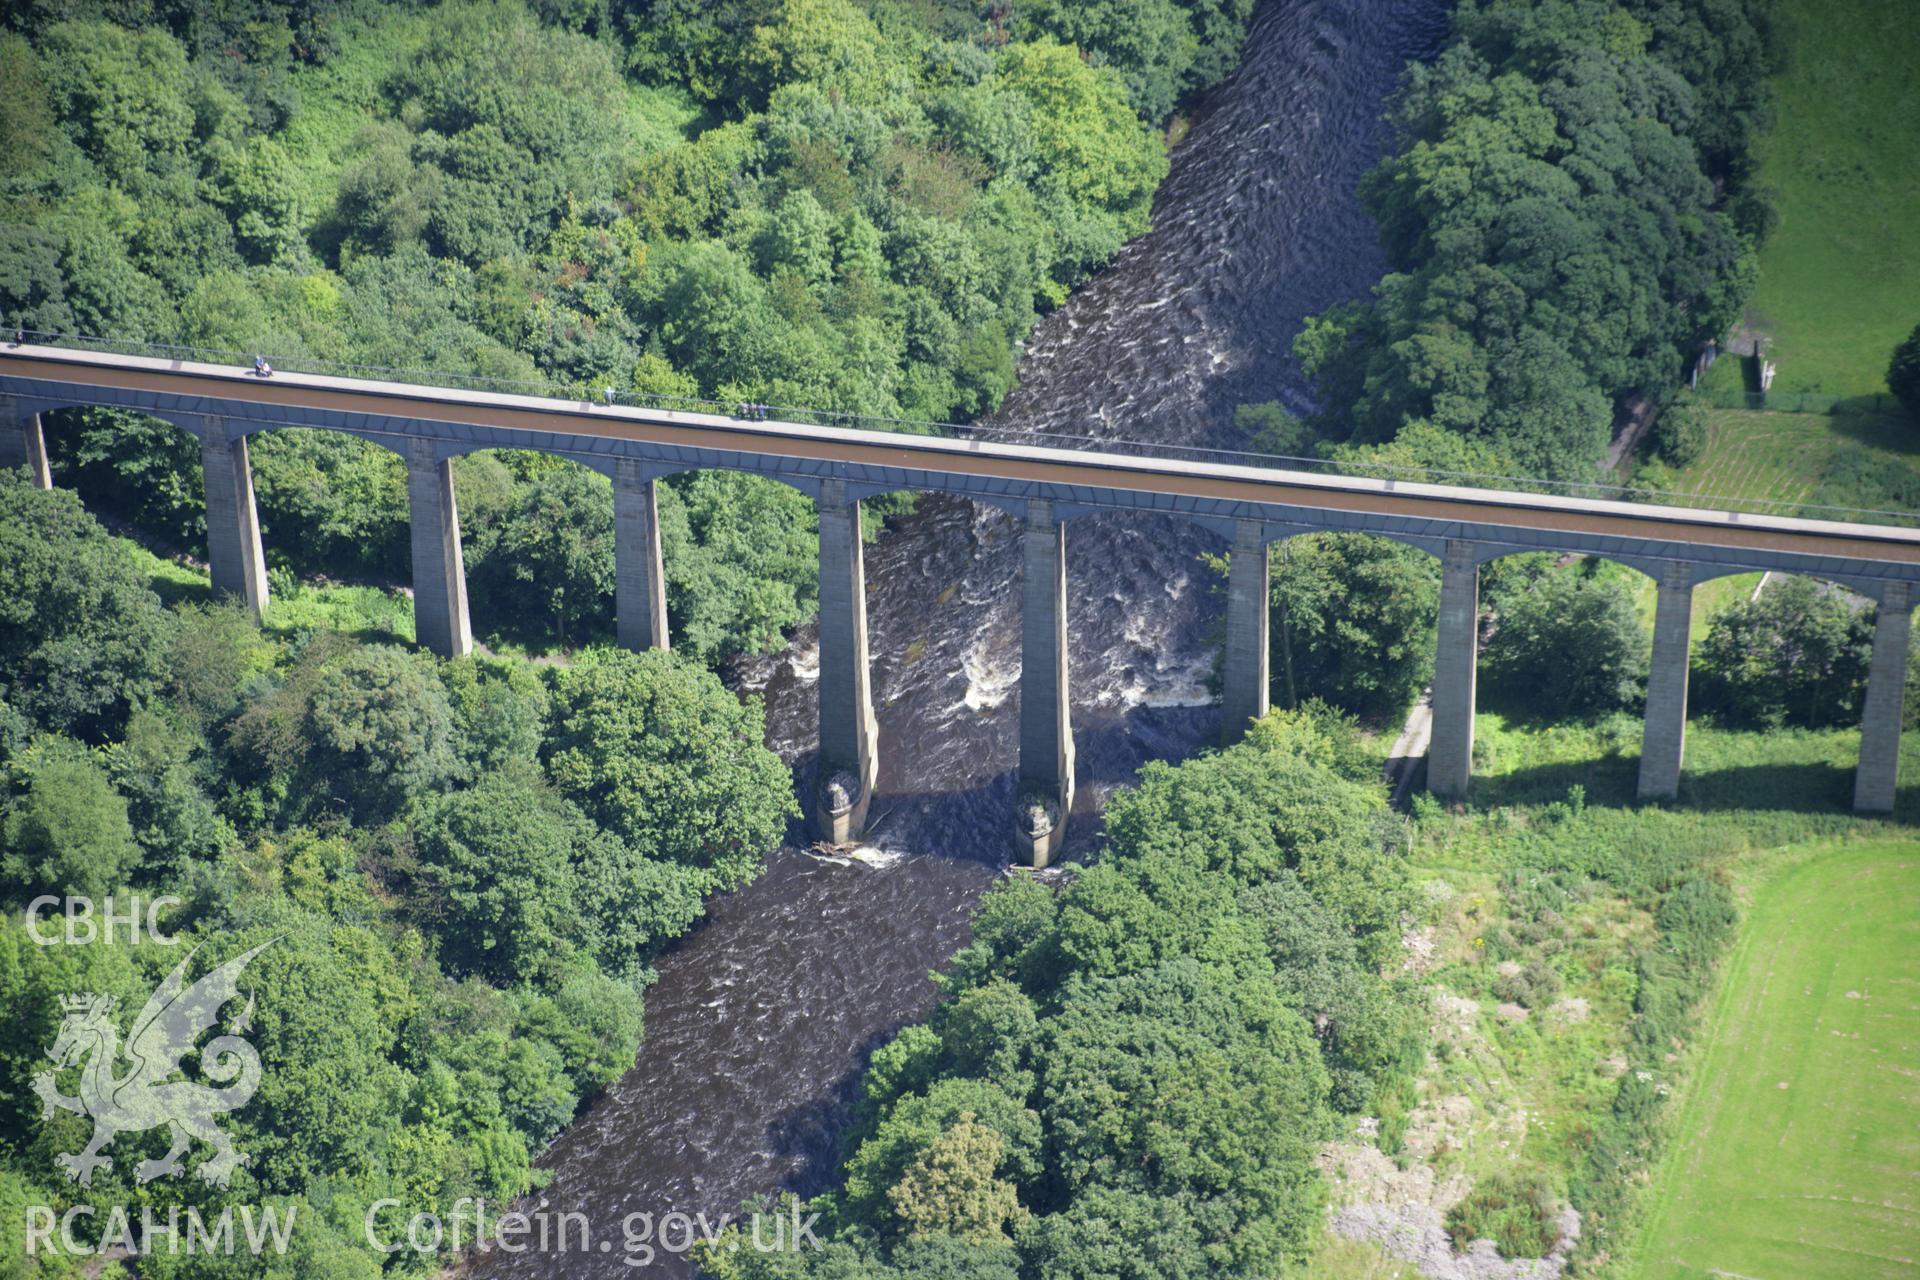 RCAHMW colour oblique aerial photograph of Pontcysyllte Aqueduct on the Ellesmere Canal. Taken on 24 July 2007 by Toby Driver